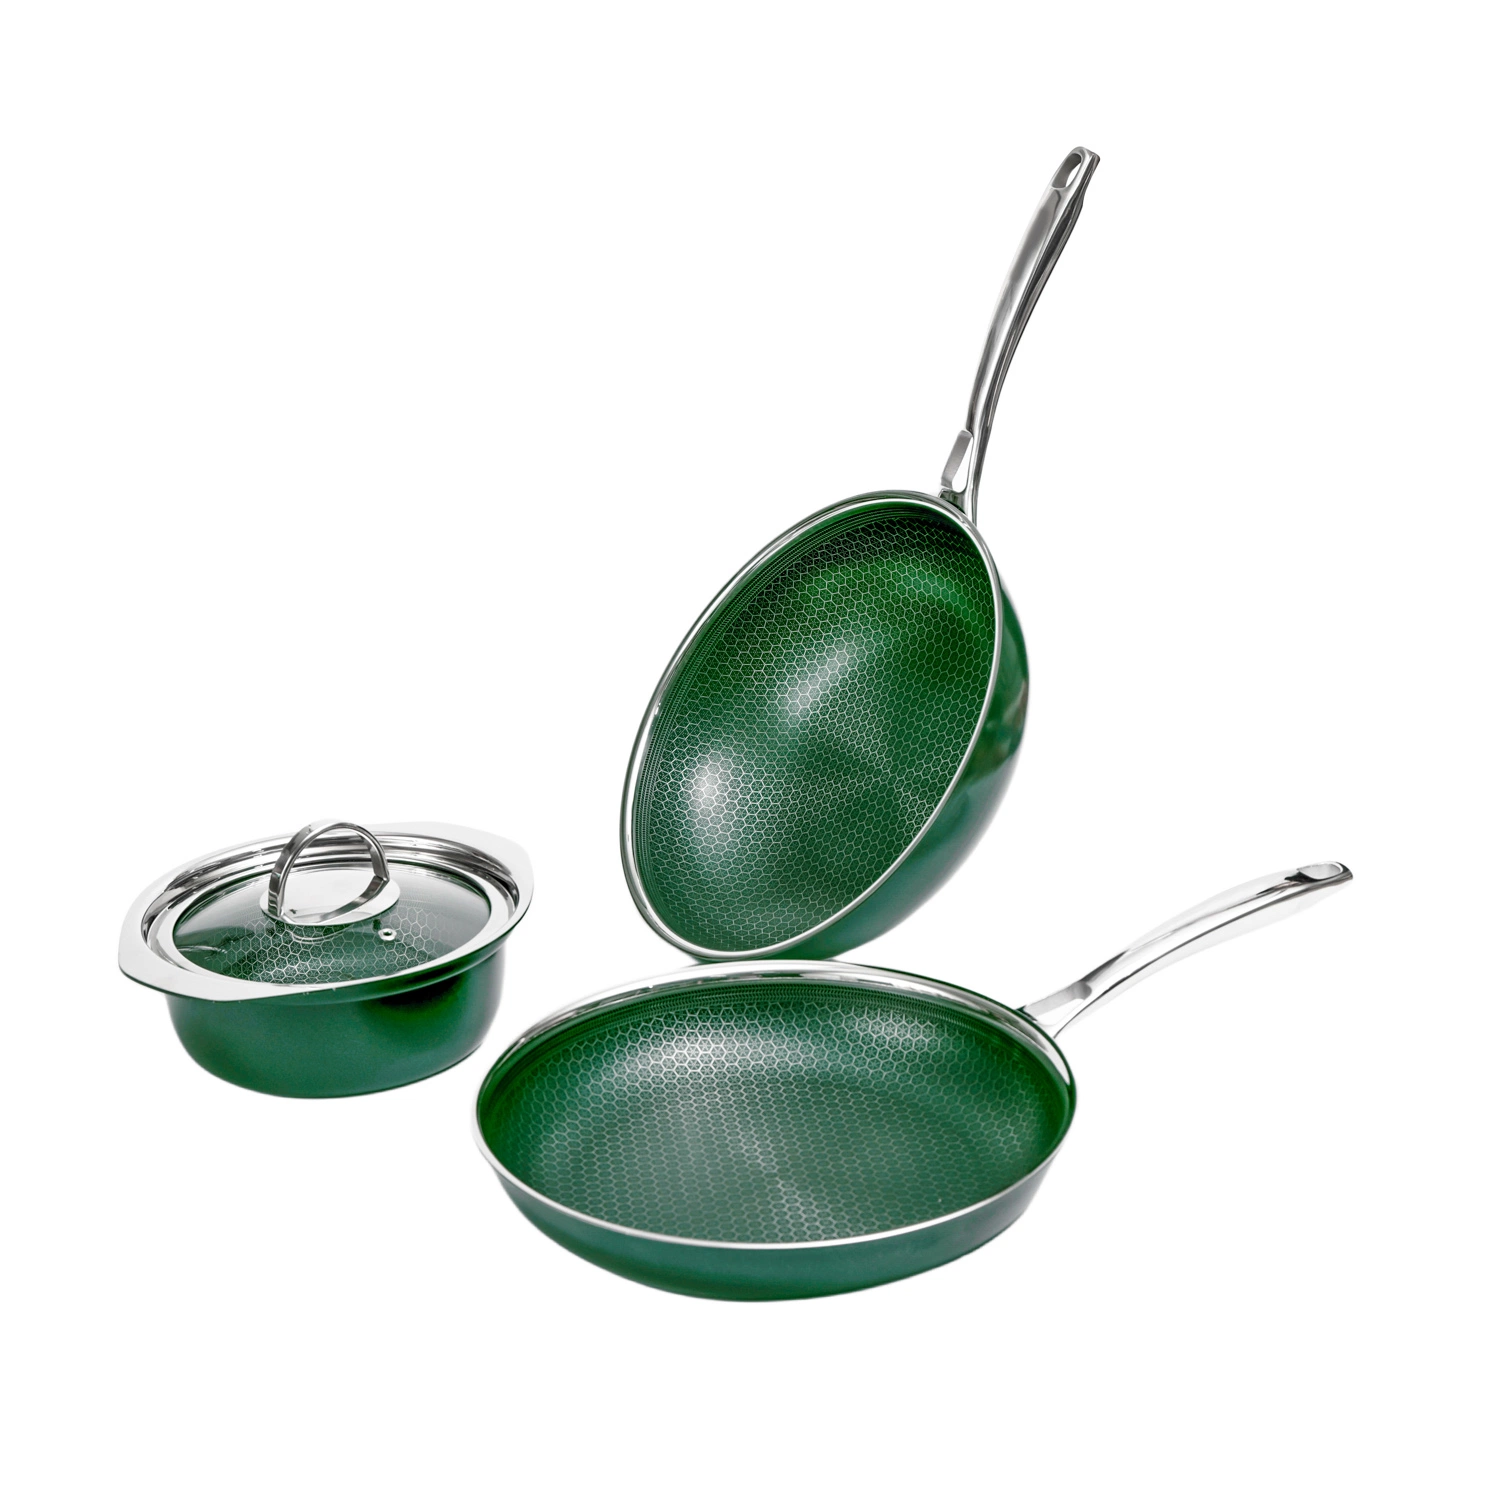 Non-Stick Honey Comb Coating Stainless Steel Blackish Green Ceramic Outer Layer 3PCS Cookware Set